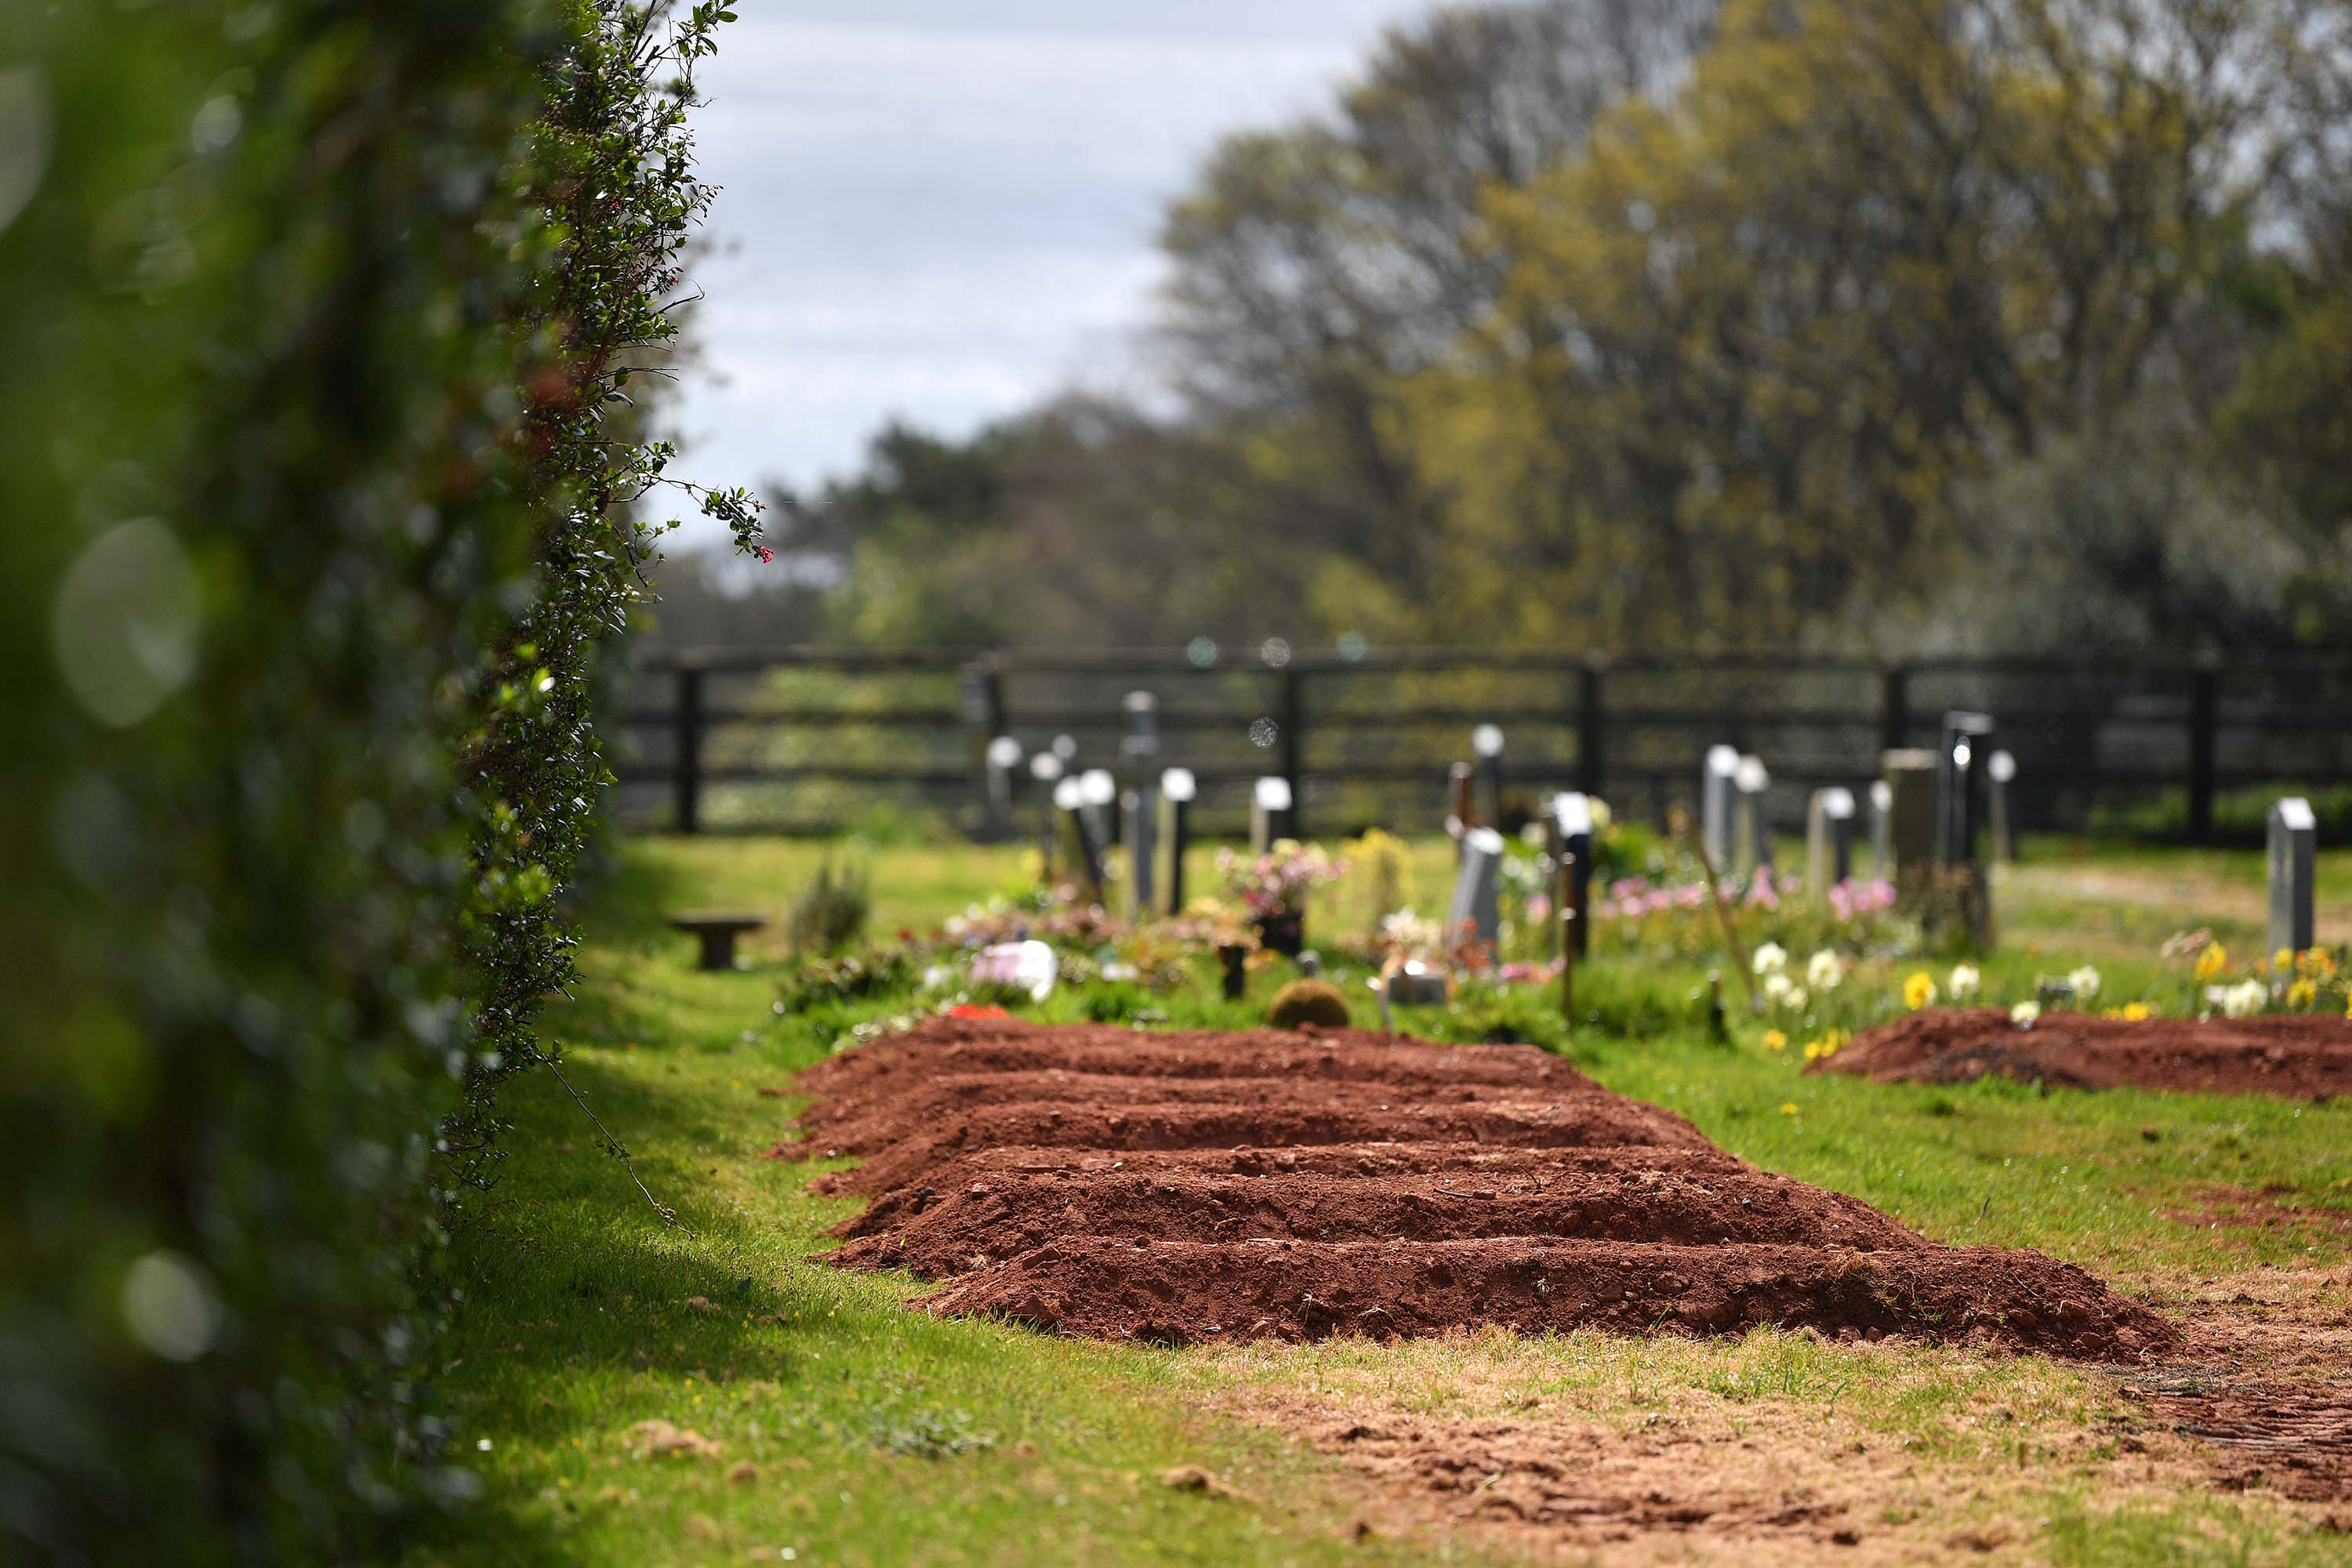 Pre-dug graves for Covid-1 deaths are seen in Maker Cemetery on April 14, 2020 in Maker, England. The Coronavirus (COVID-19) pandemic has spread to many countries across the world, claiming over 115,000 lives and infecting over 1. 9 million people. (Photo by Dan Mullan/Getty Images)